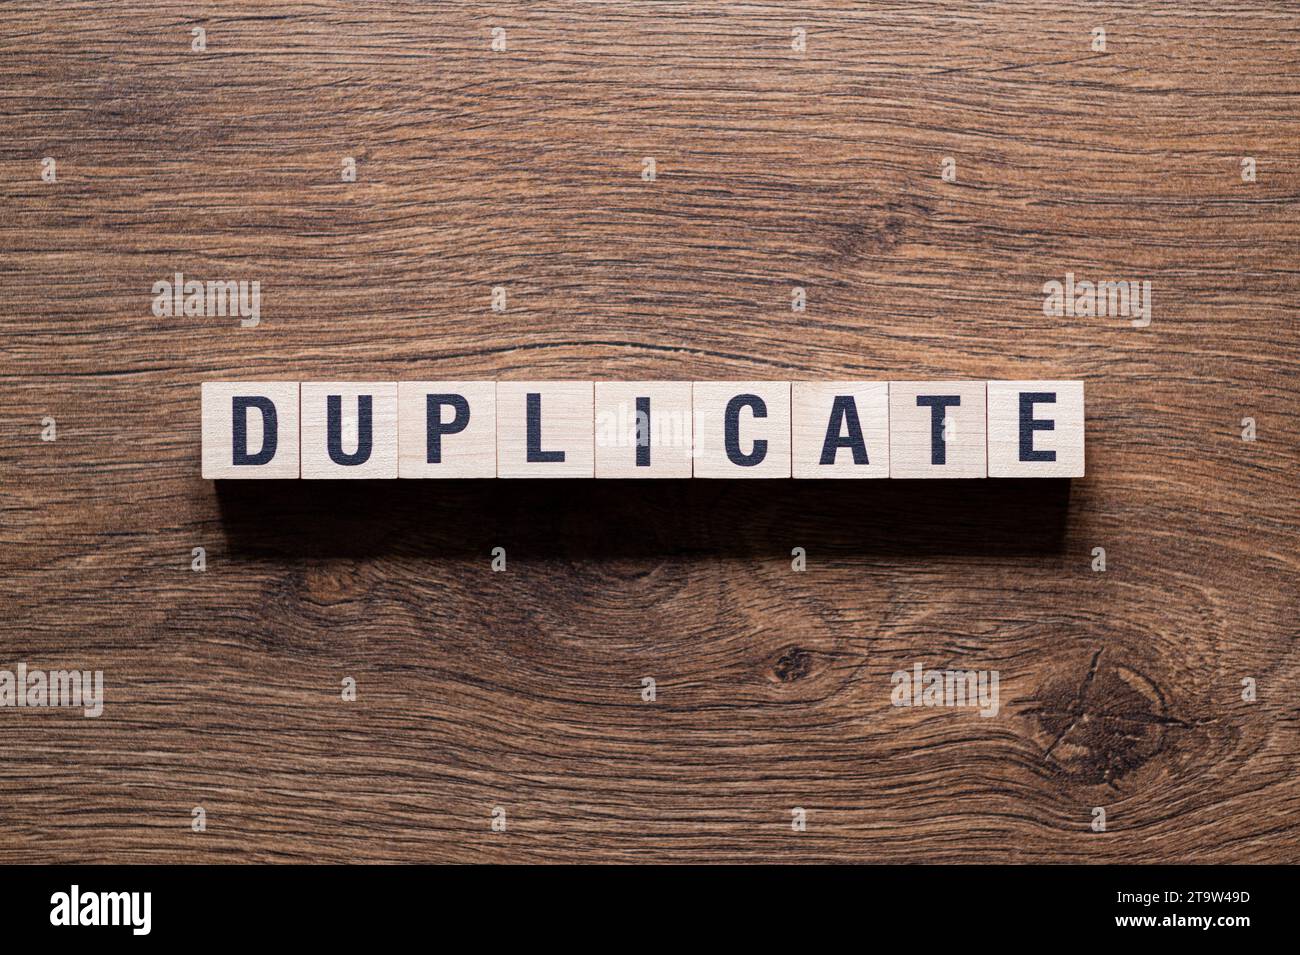 Duplicate - word concept on building blocks, text Stock Photo